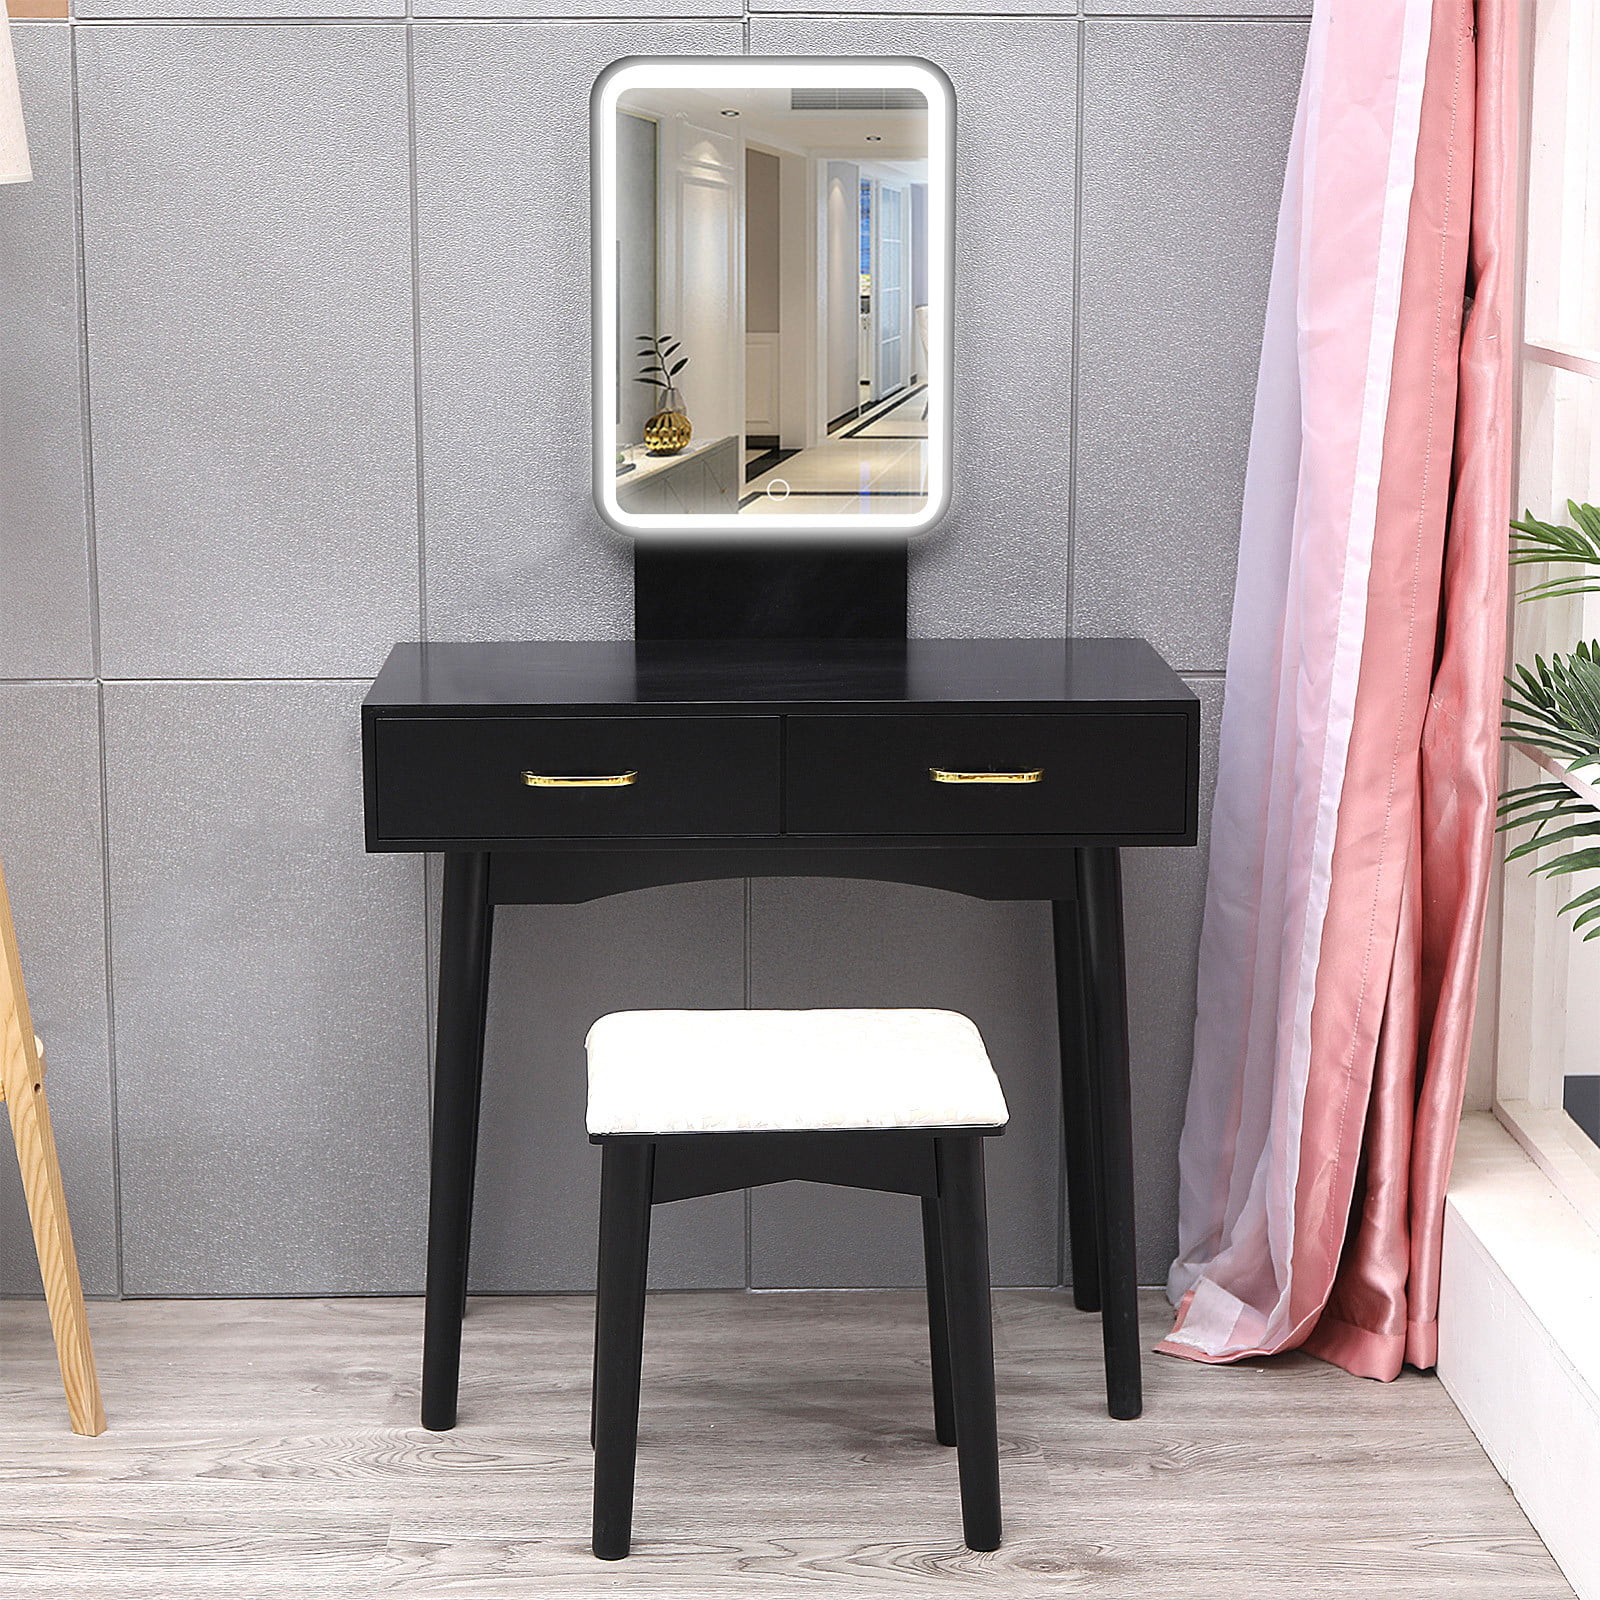 Details about   LED Mirror Makeup Vanity Dressing Table Set With Stool Dimmable Combo Vanity Set 